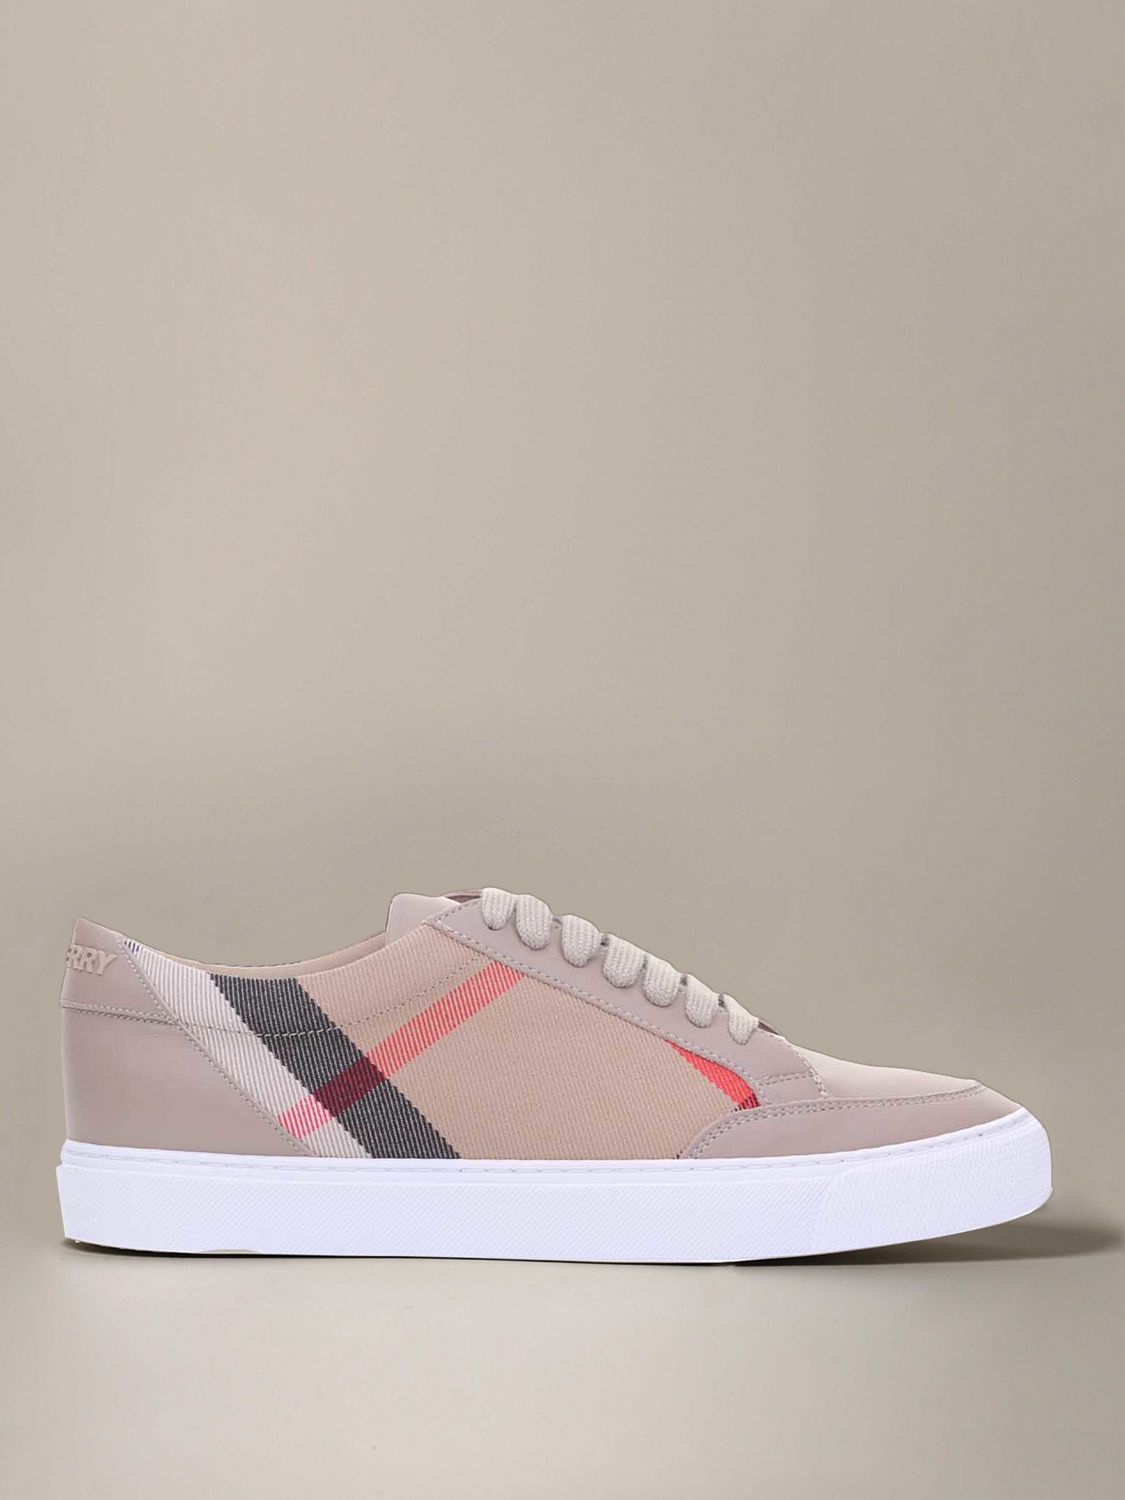 womens burberry sneakers